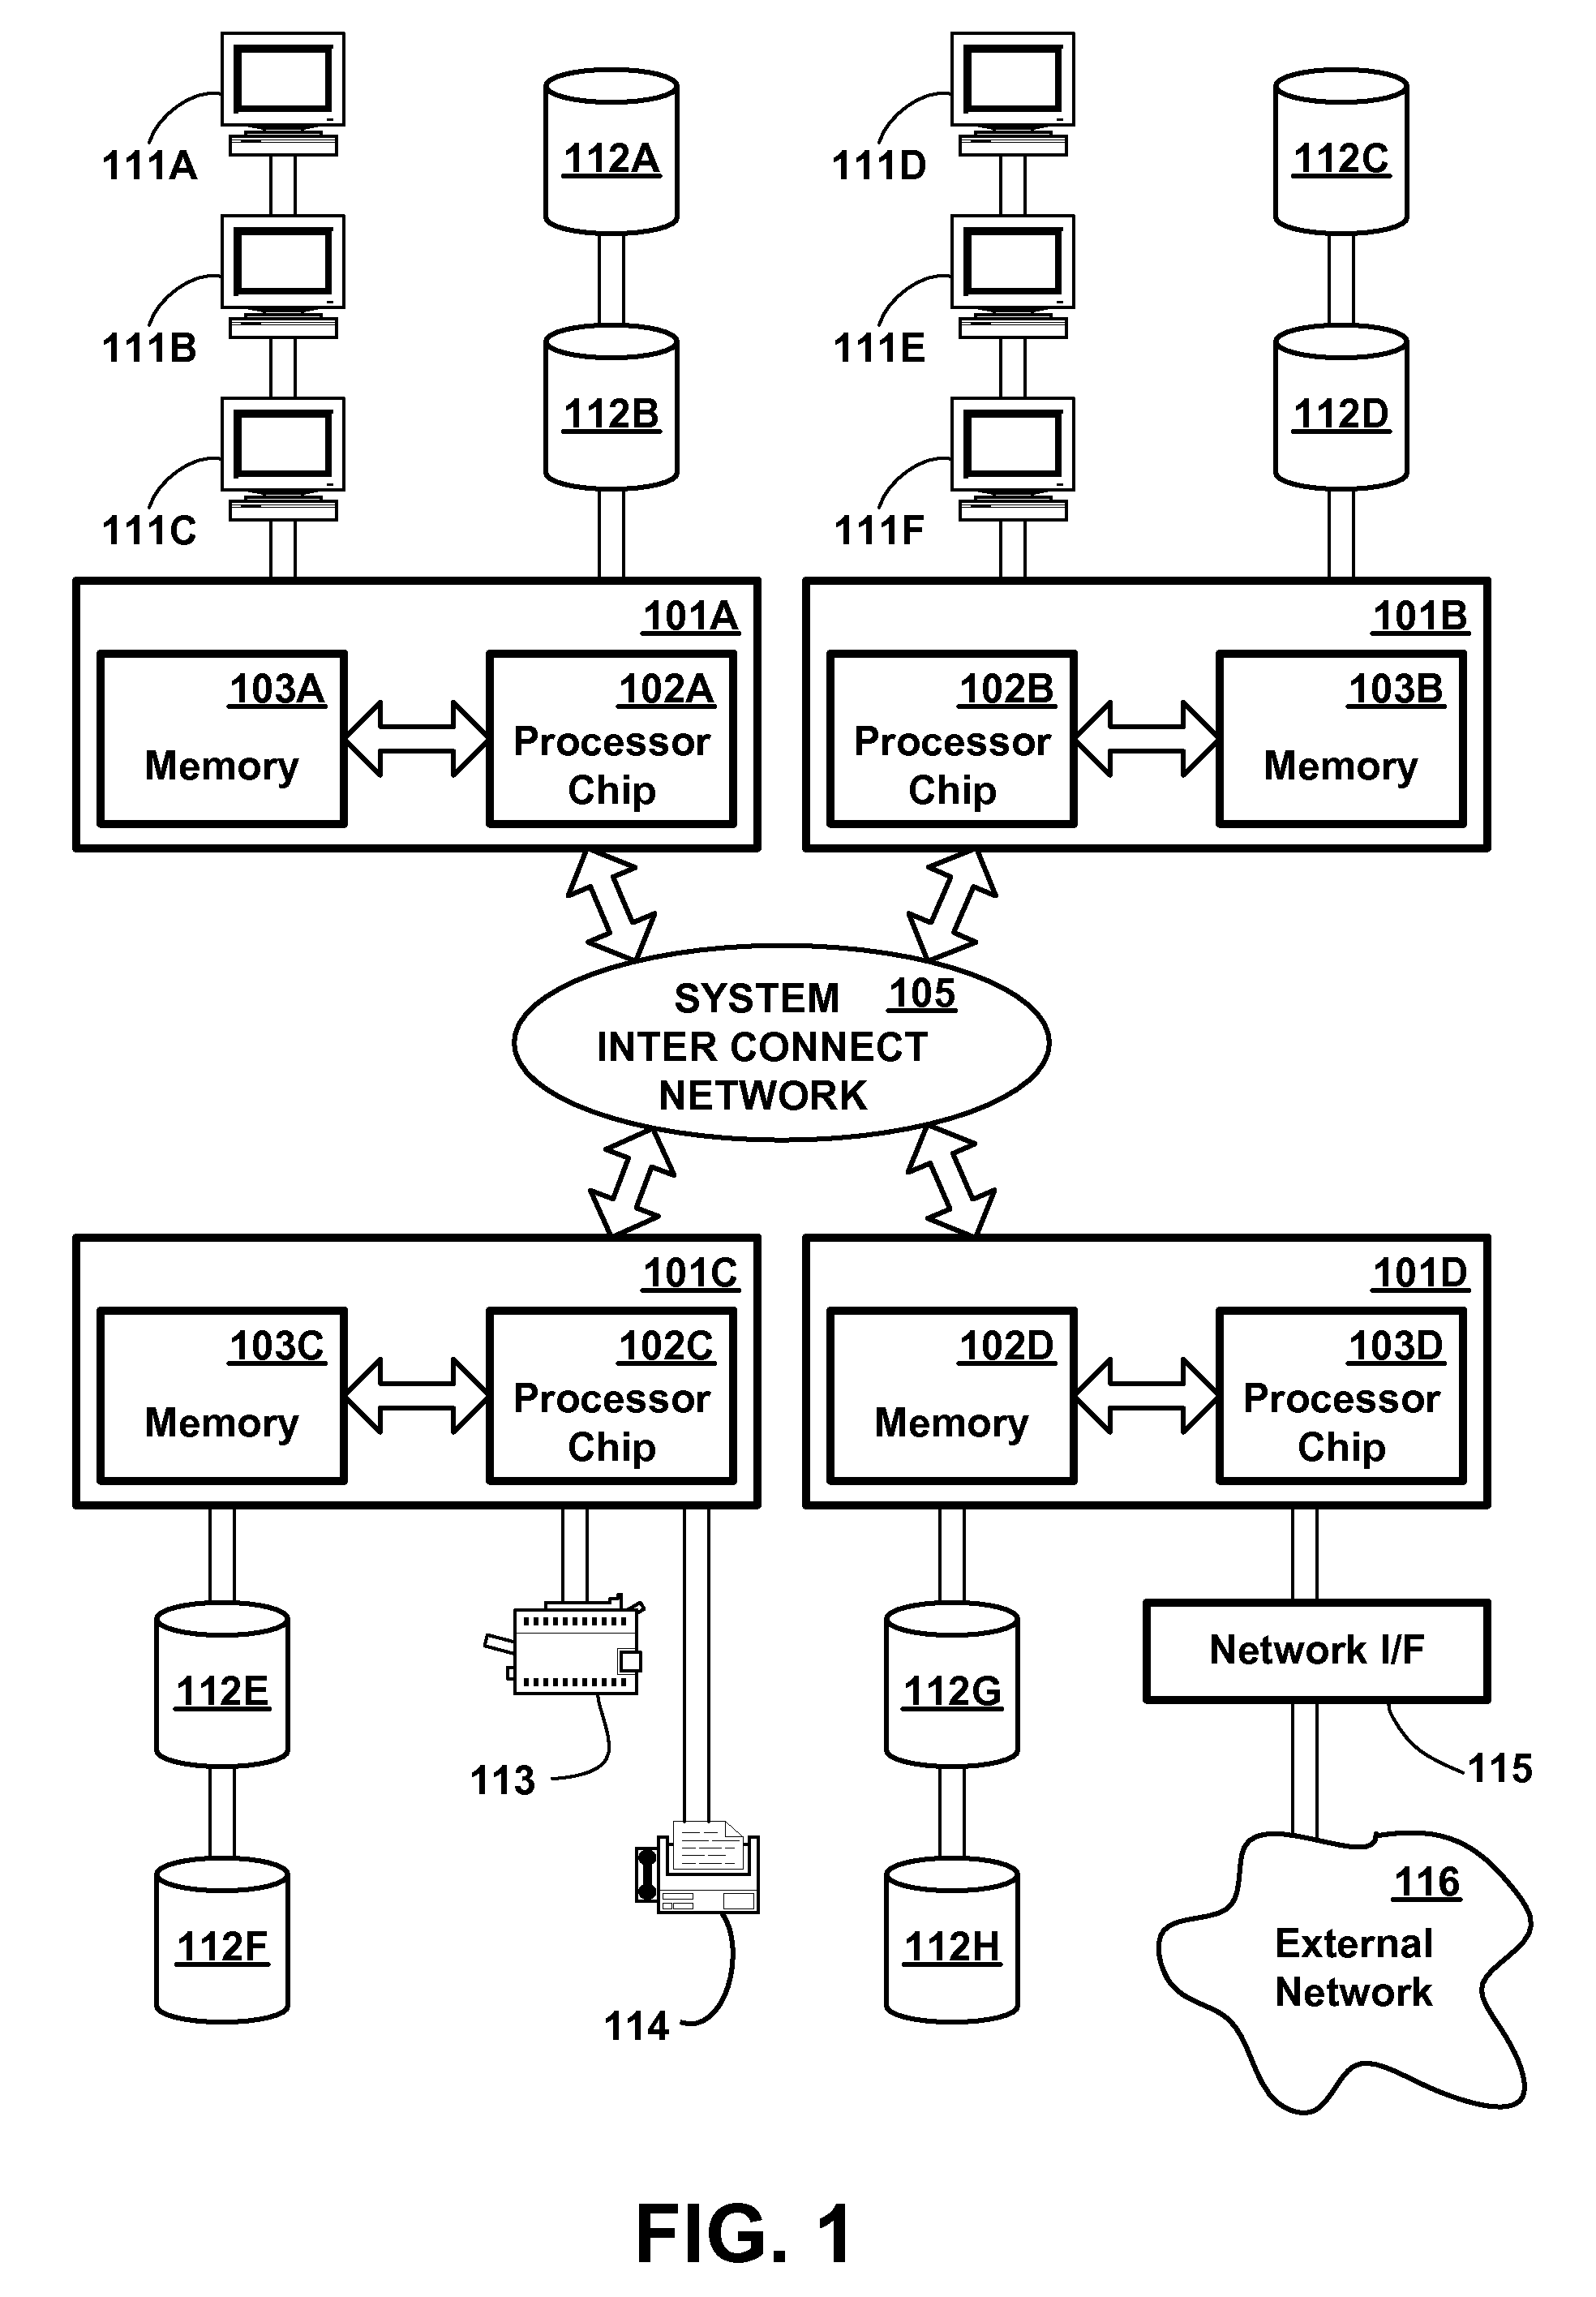 Method and Apparatus for Protecting Encryption Keys in a Logically Partitioned Computer System Environment